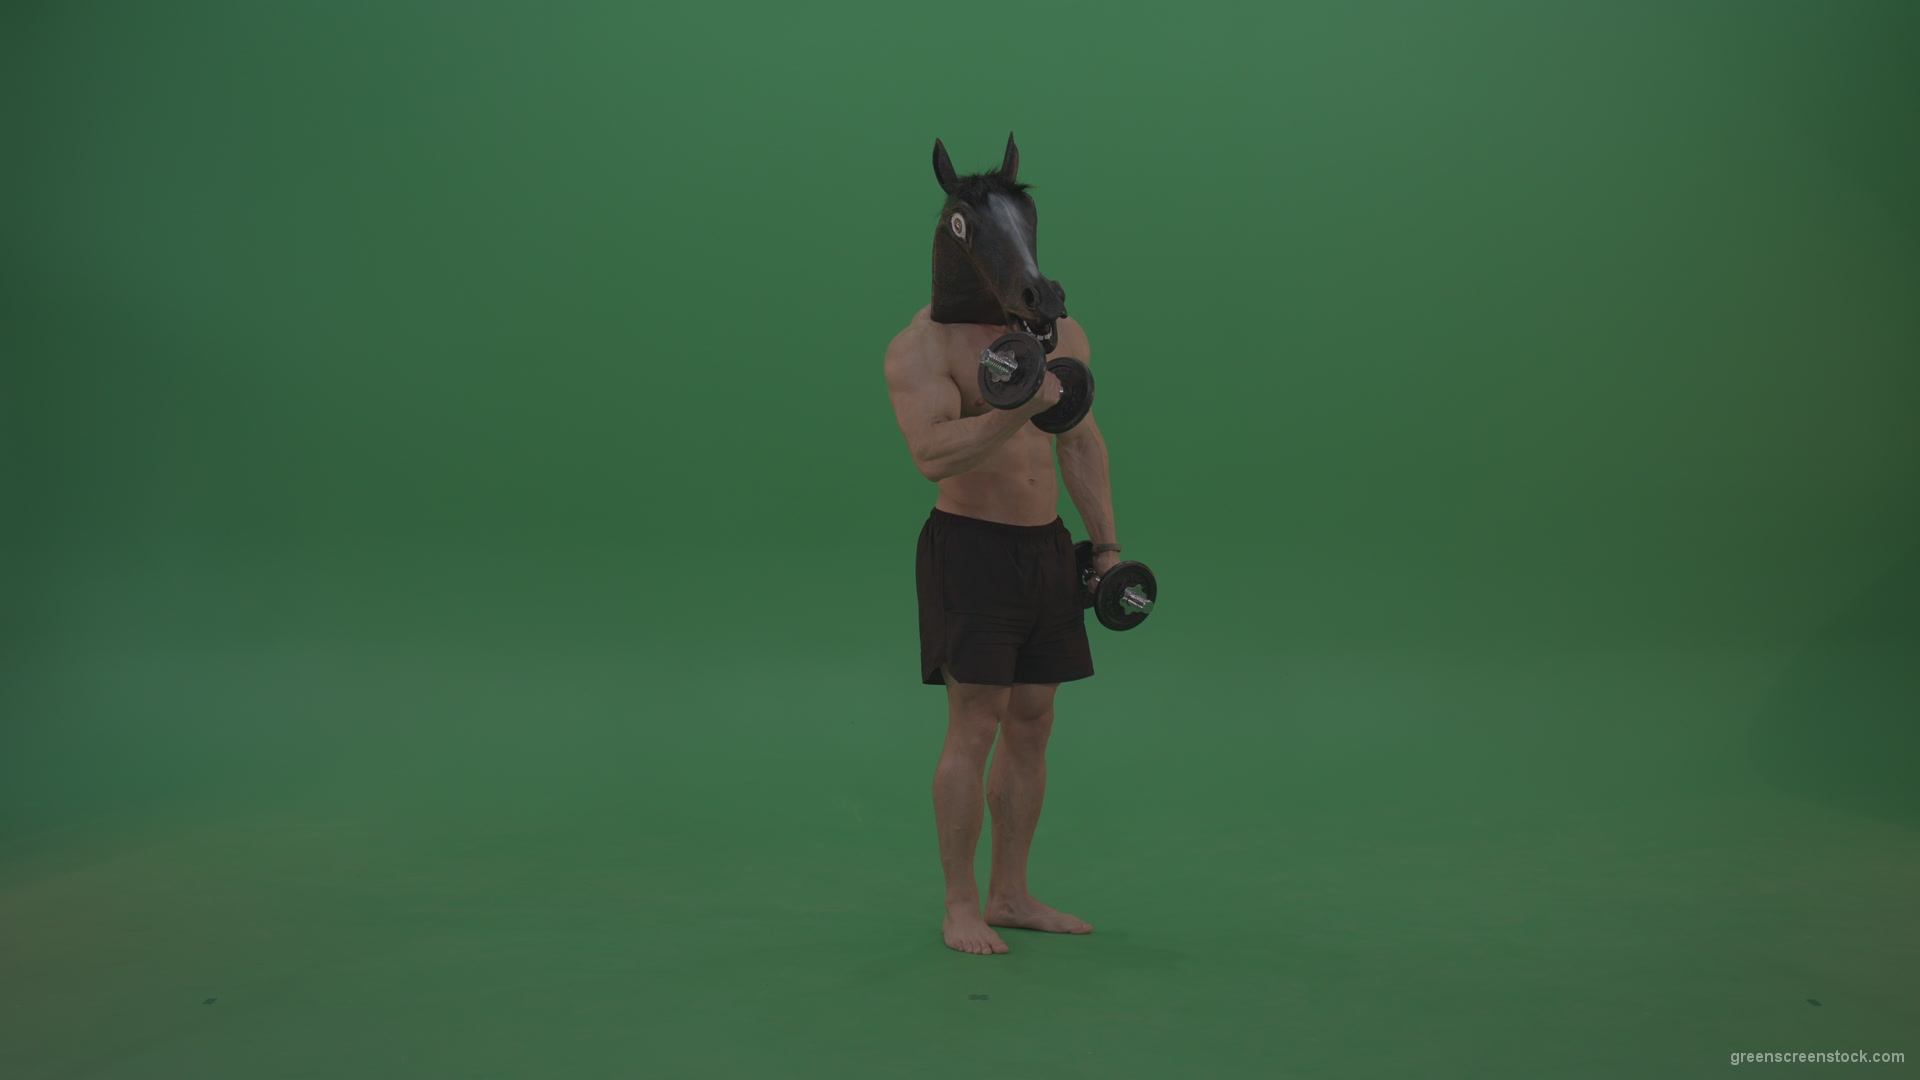 vj video background Ripped-man-with-horse-head-lifts-dumbells-over-chromakey-background_003